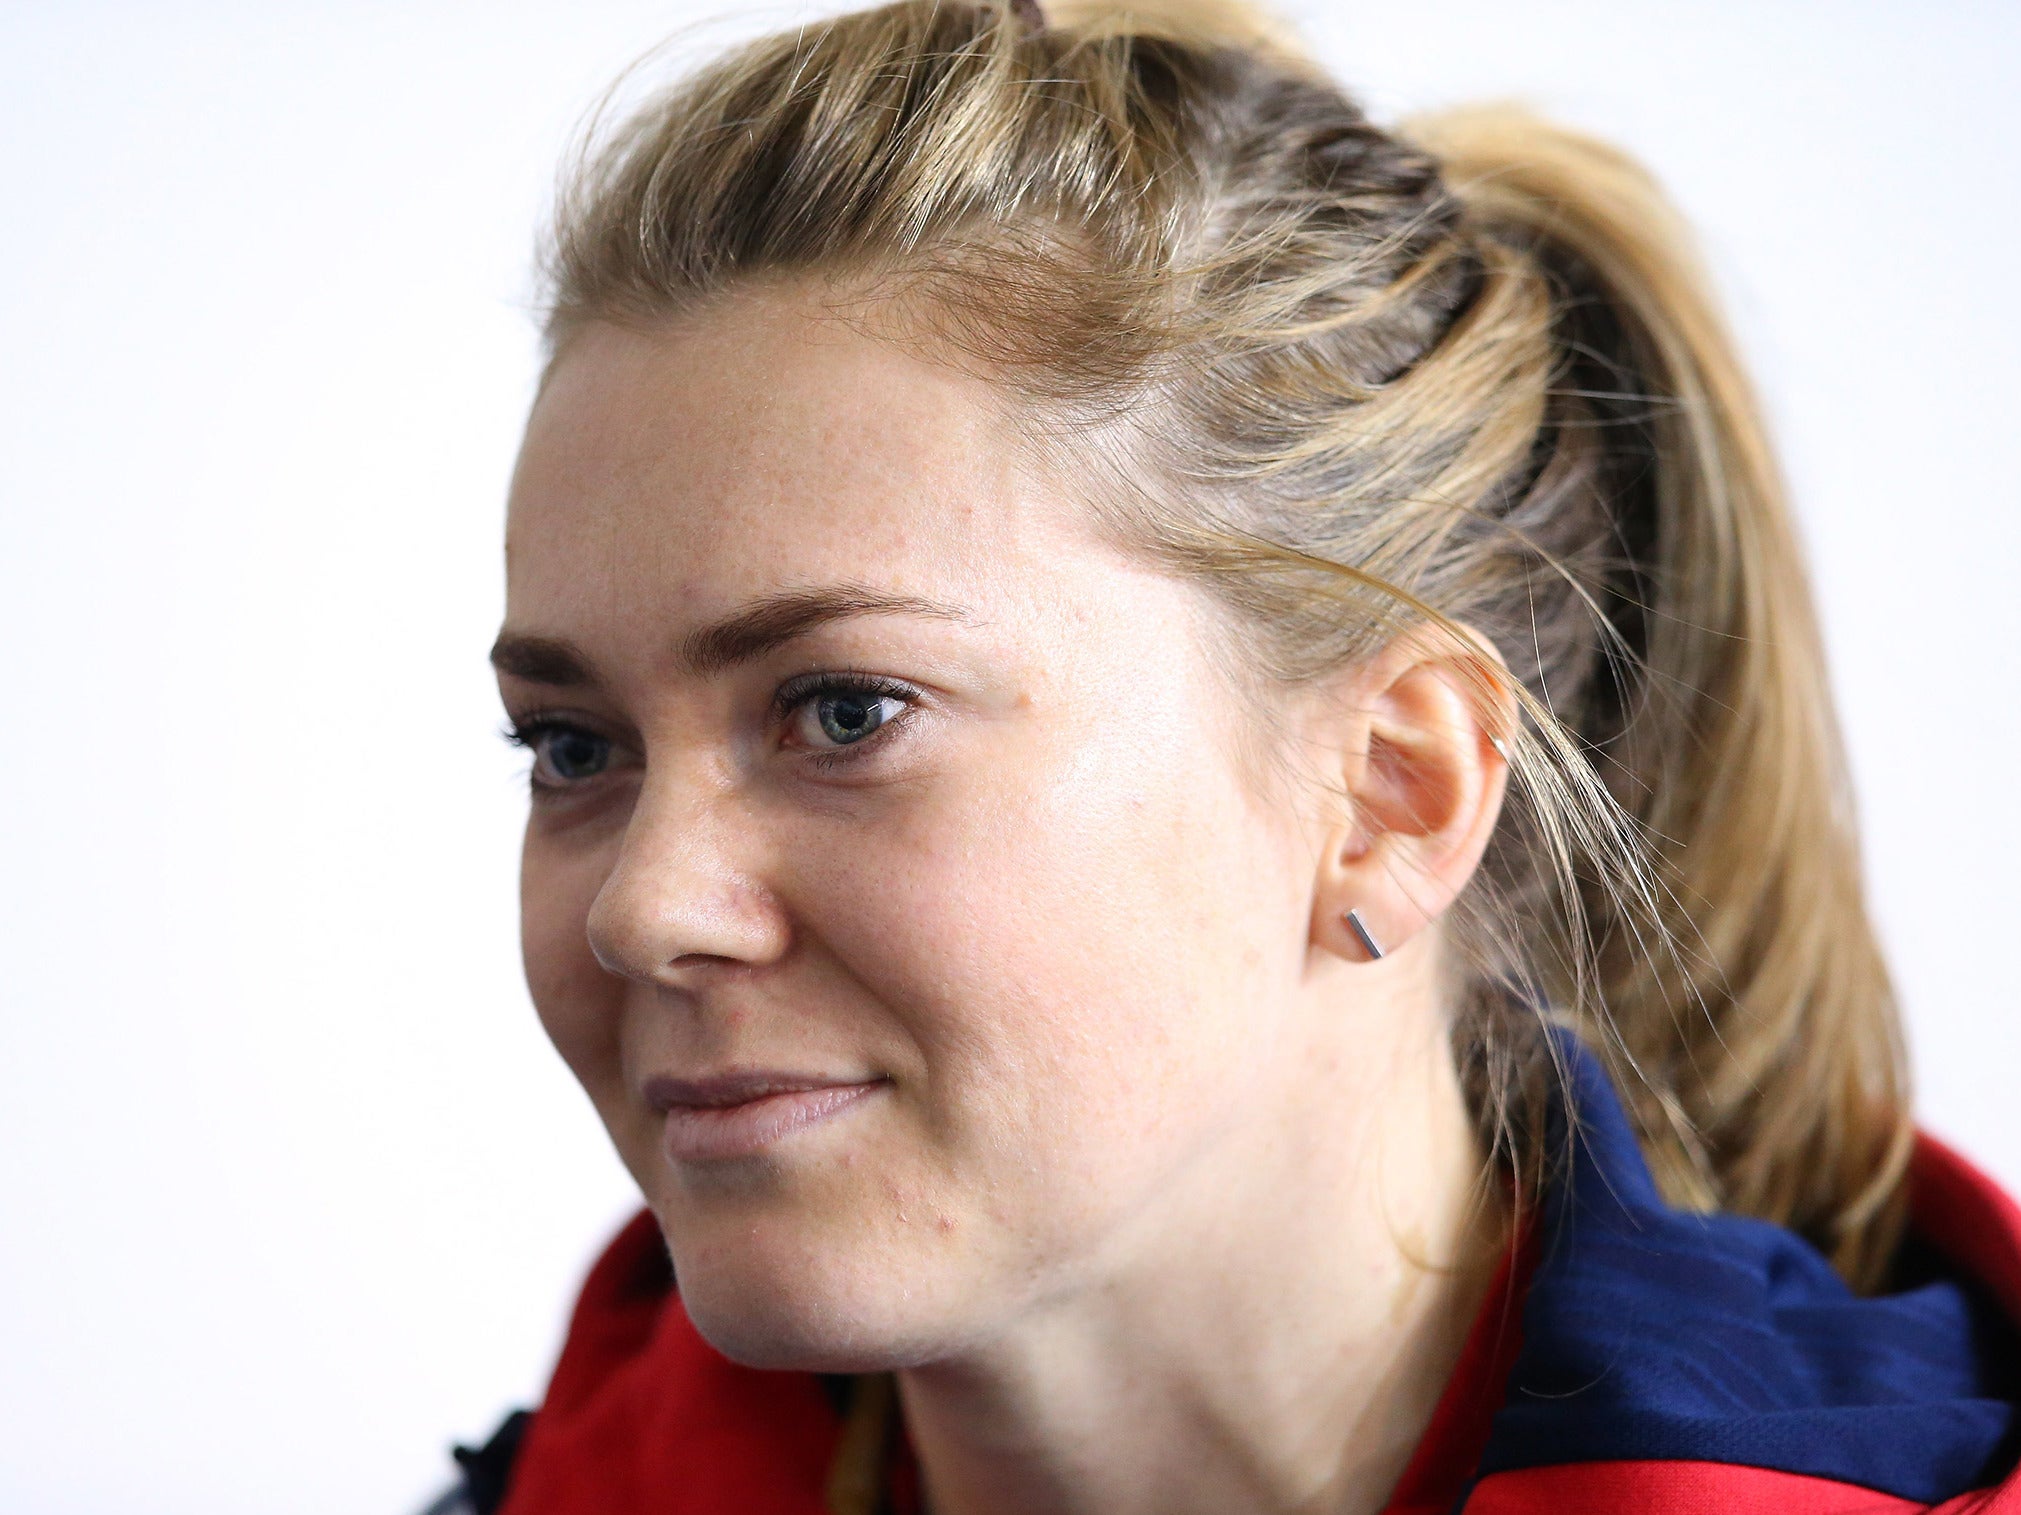 Varnish was dropped by British Cycling after failing to qualify the women's team sprint for Rio 2016